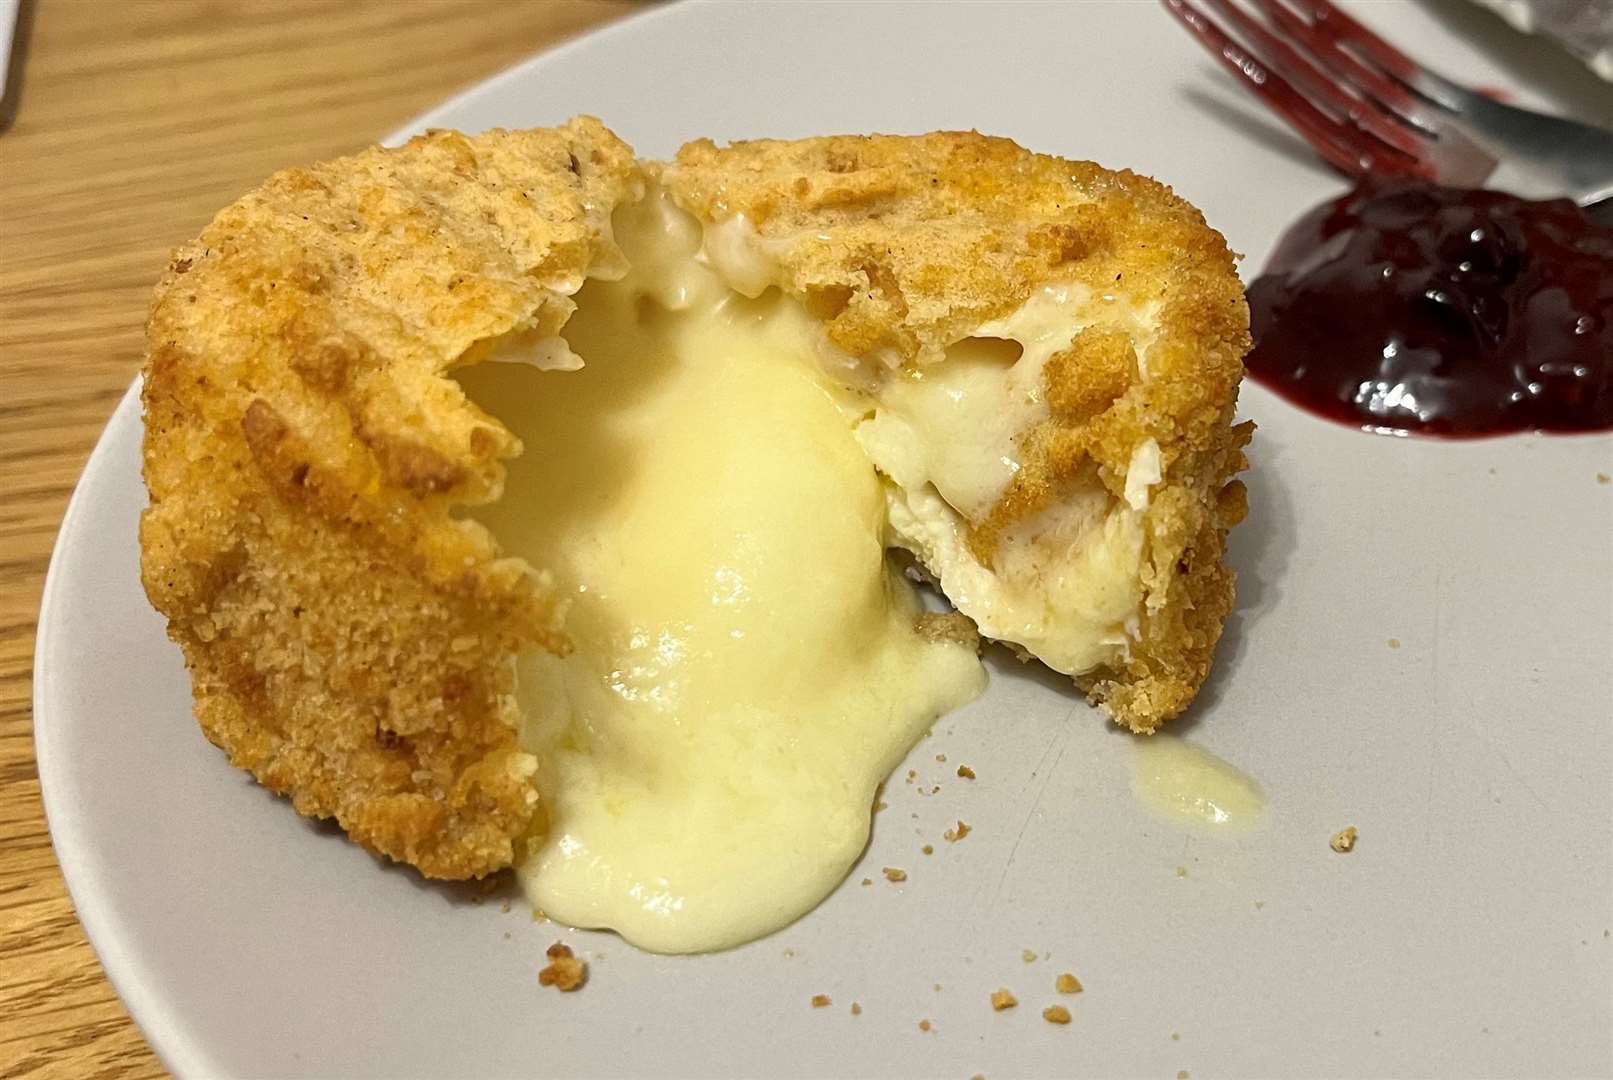 Inside the breaded camembert which paired perfectly with the berry compote